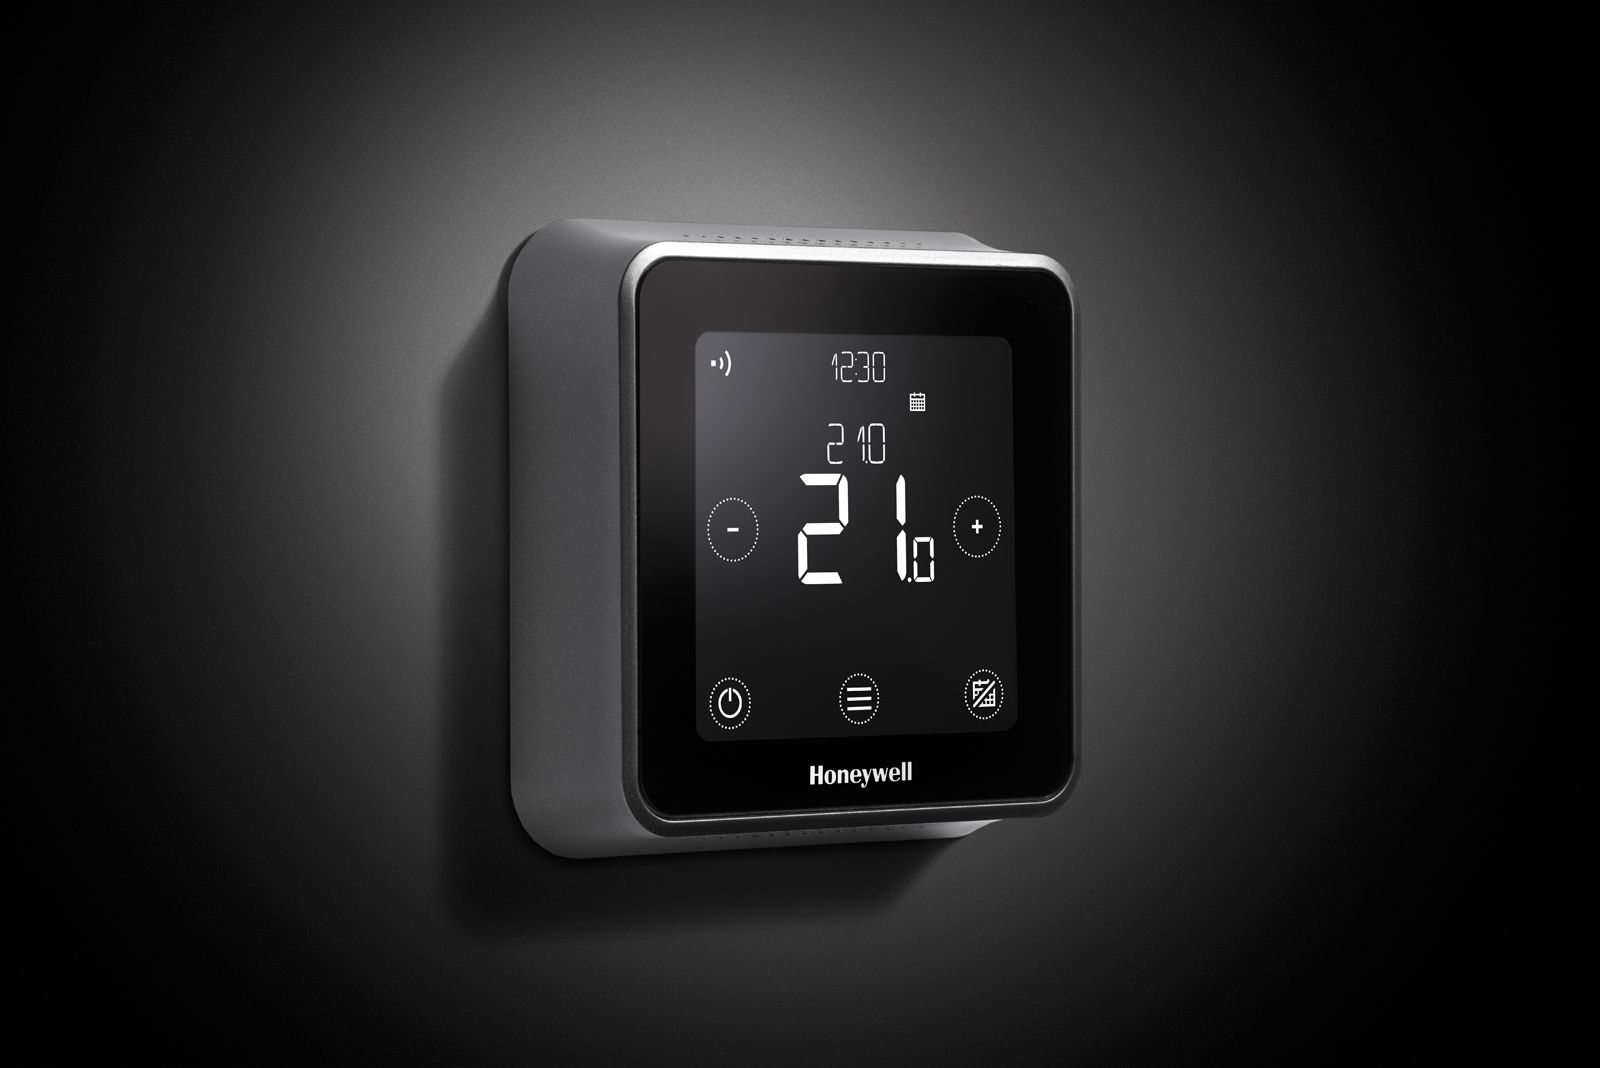 honeywell lyric t6 smart thermostat will make your home toasty warm when you’re on your way home image 1